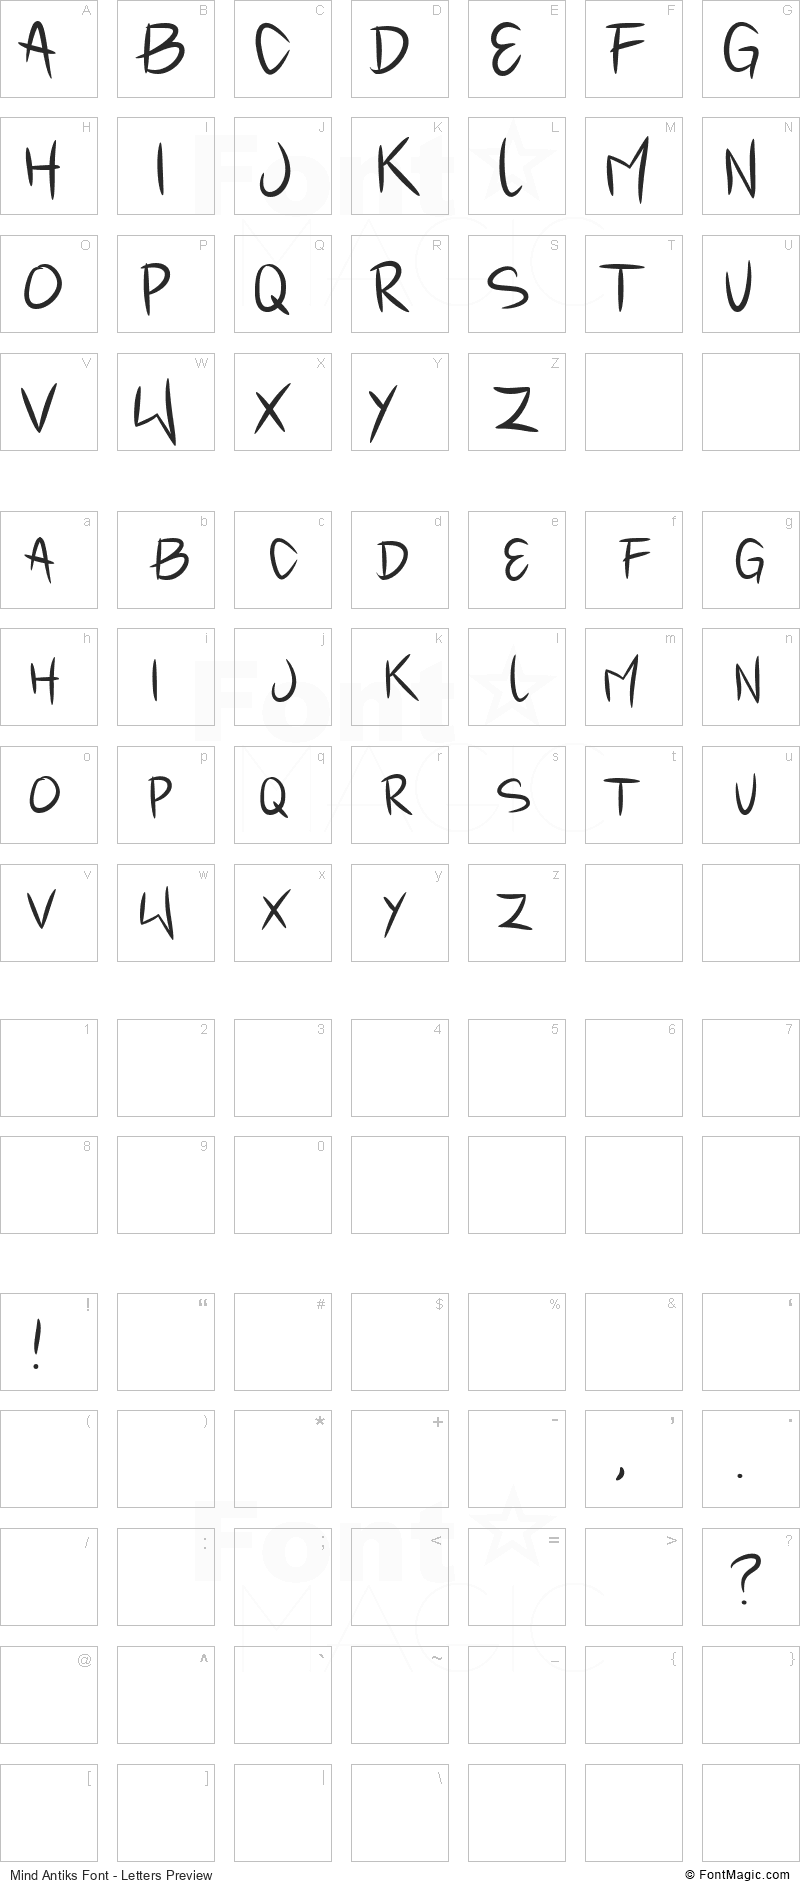 Mind Antiks Font - All Latters Preview Chart